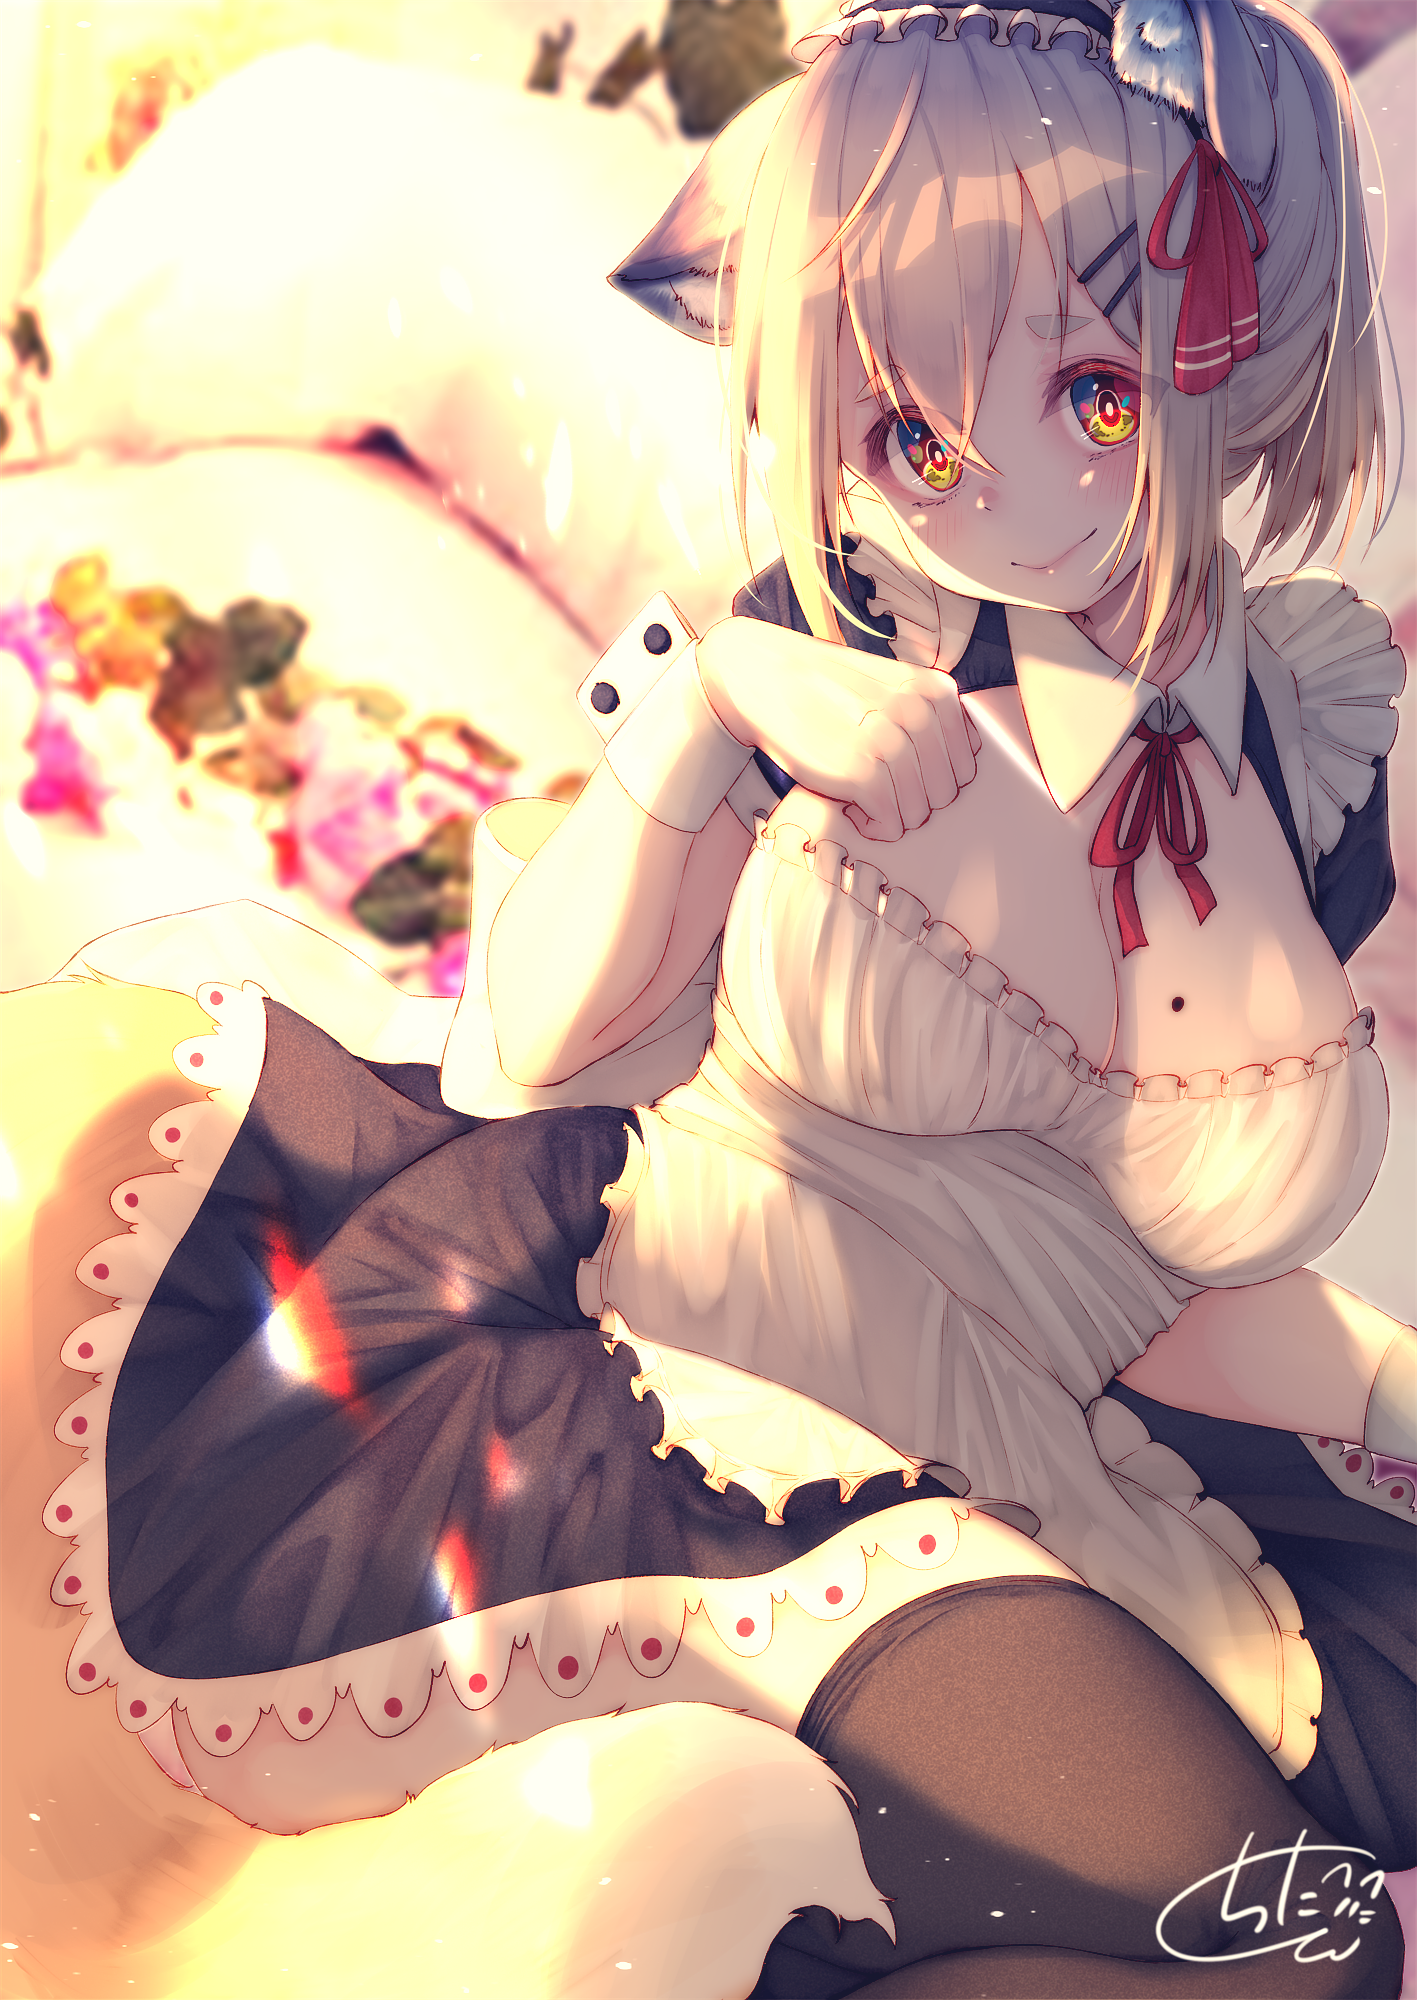 Anime 1417x2000 anime girls anime original characters fantasy girl fox girl animal ears fox ears tail maid dress looking at viewer cleavage blushing smiling thigh-highs lens flare portrait display artwork drawing digital art illustration 2D chita (ketchup) maid outfit